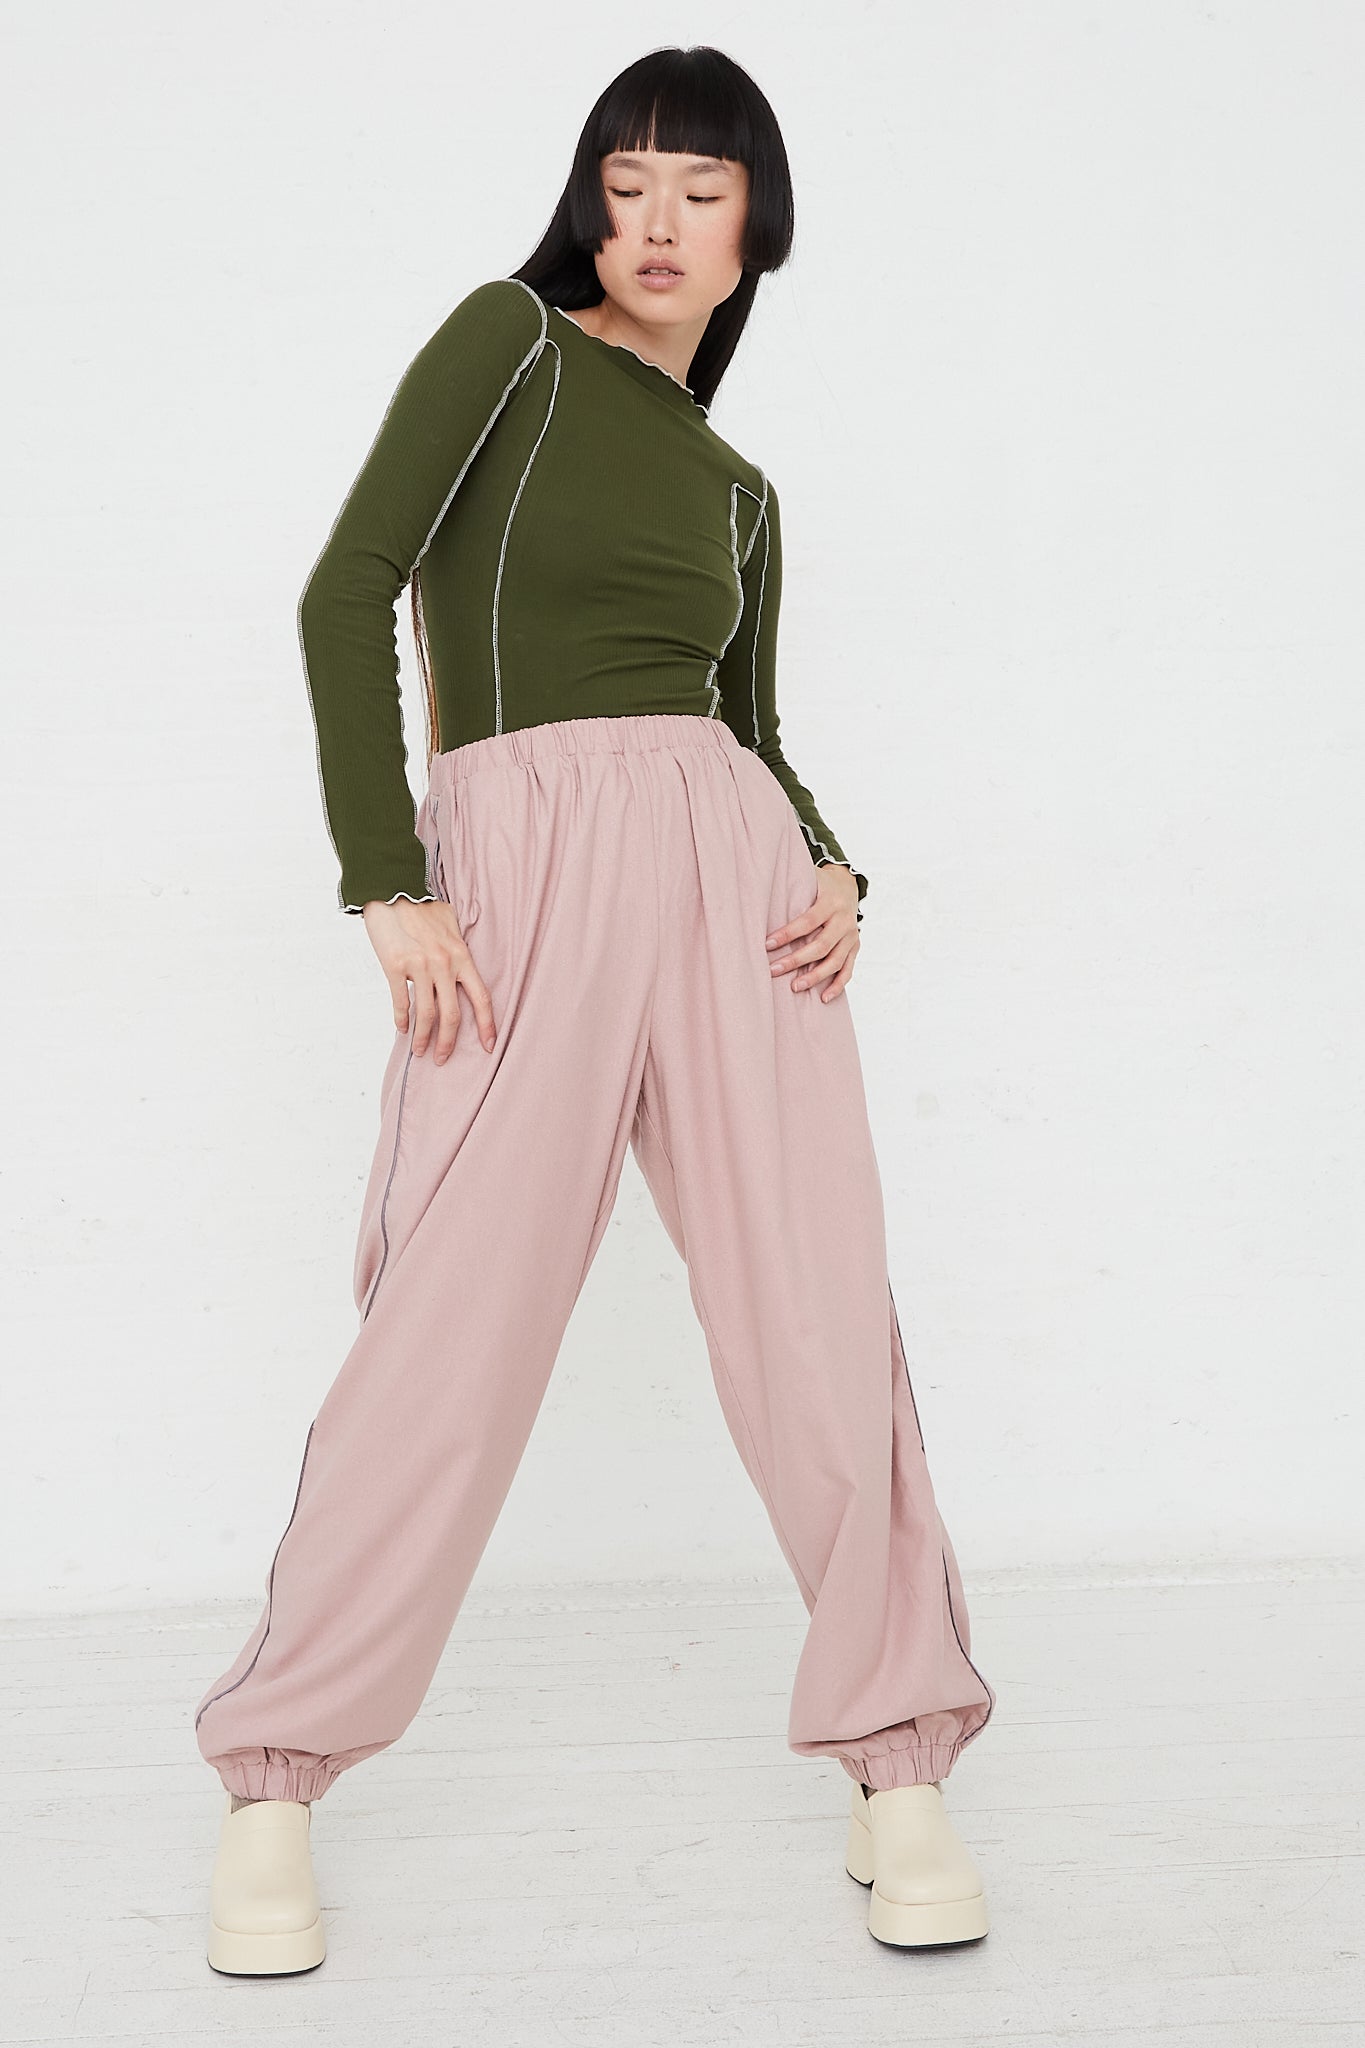 Lesie High Waist Pant in Pompei Rose by Baserange for Oroboro Front